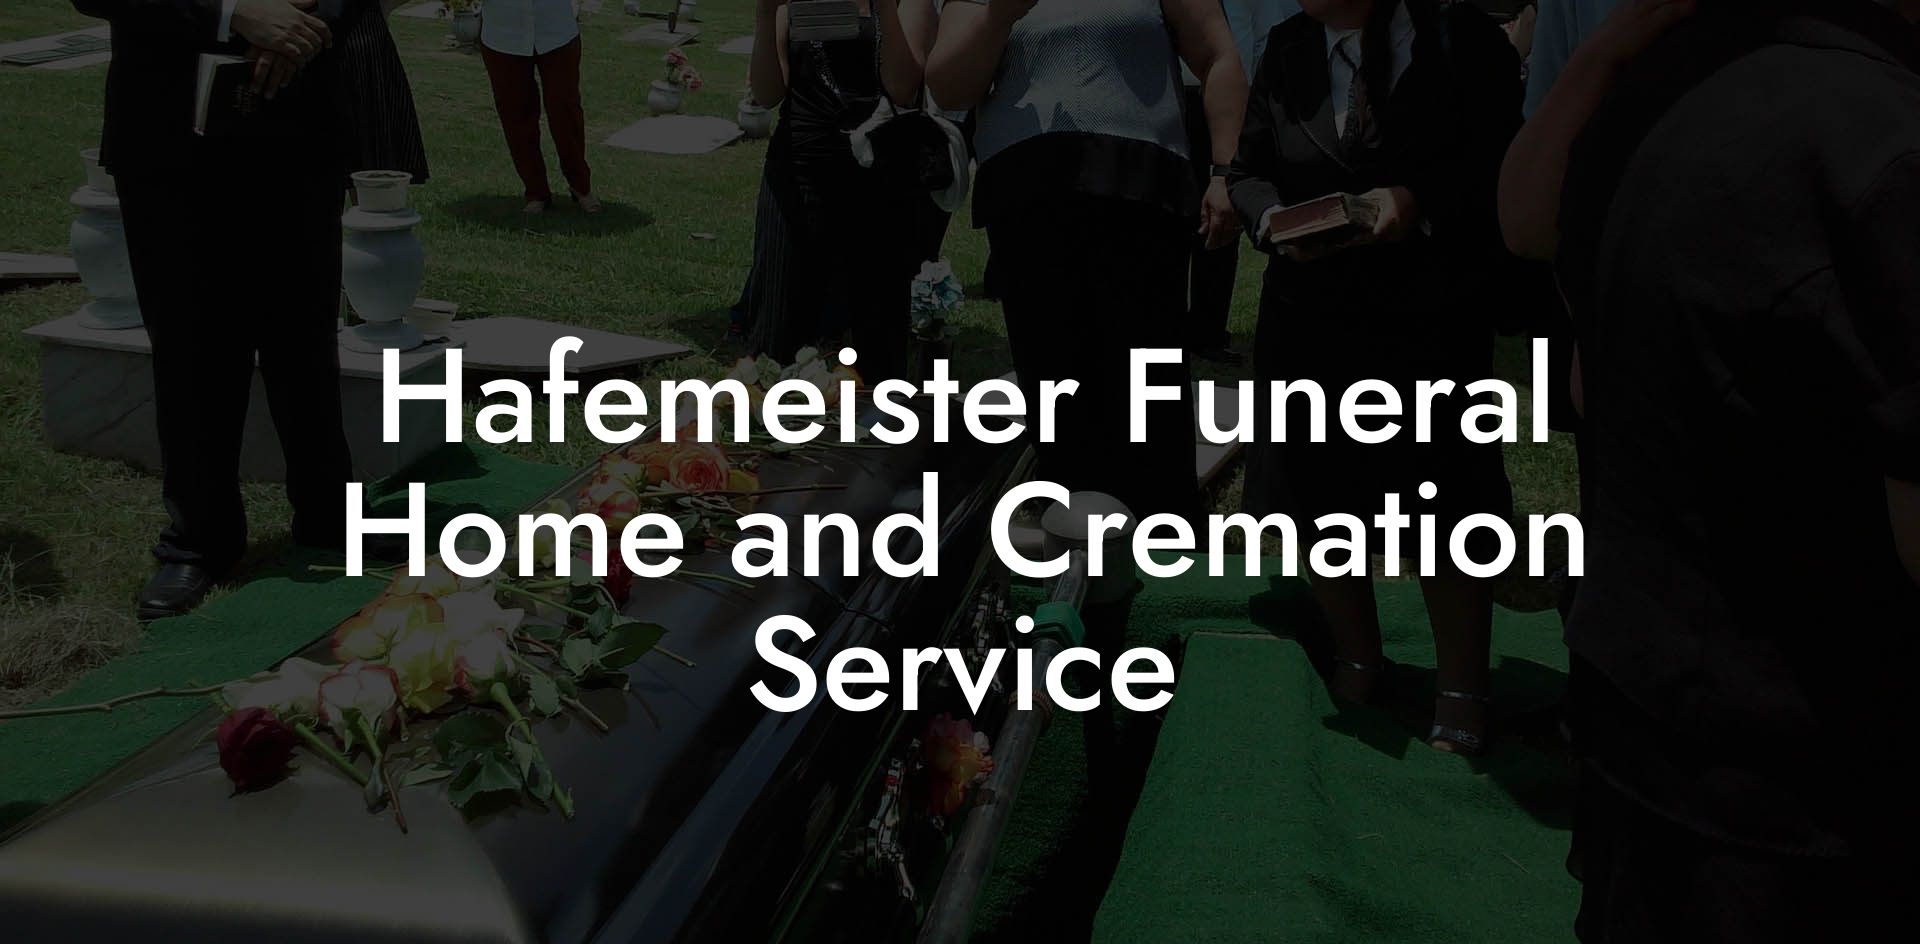 Hafemeister Funeral Home and Cremation Service